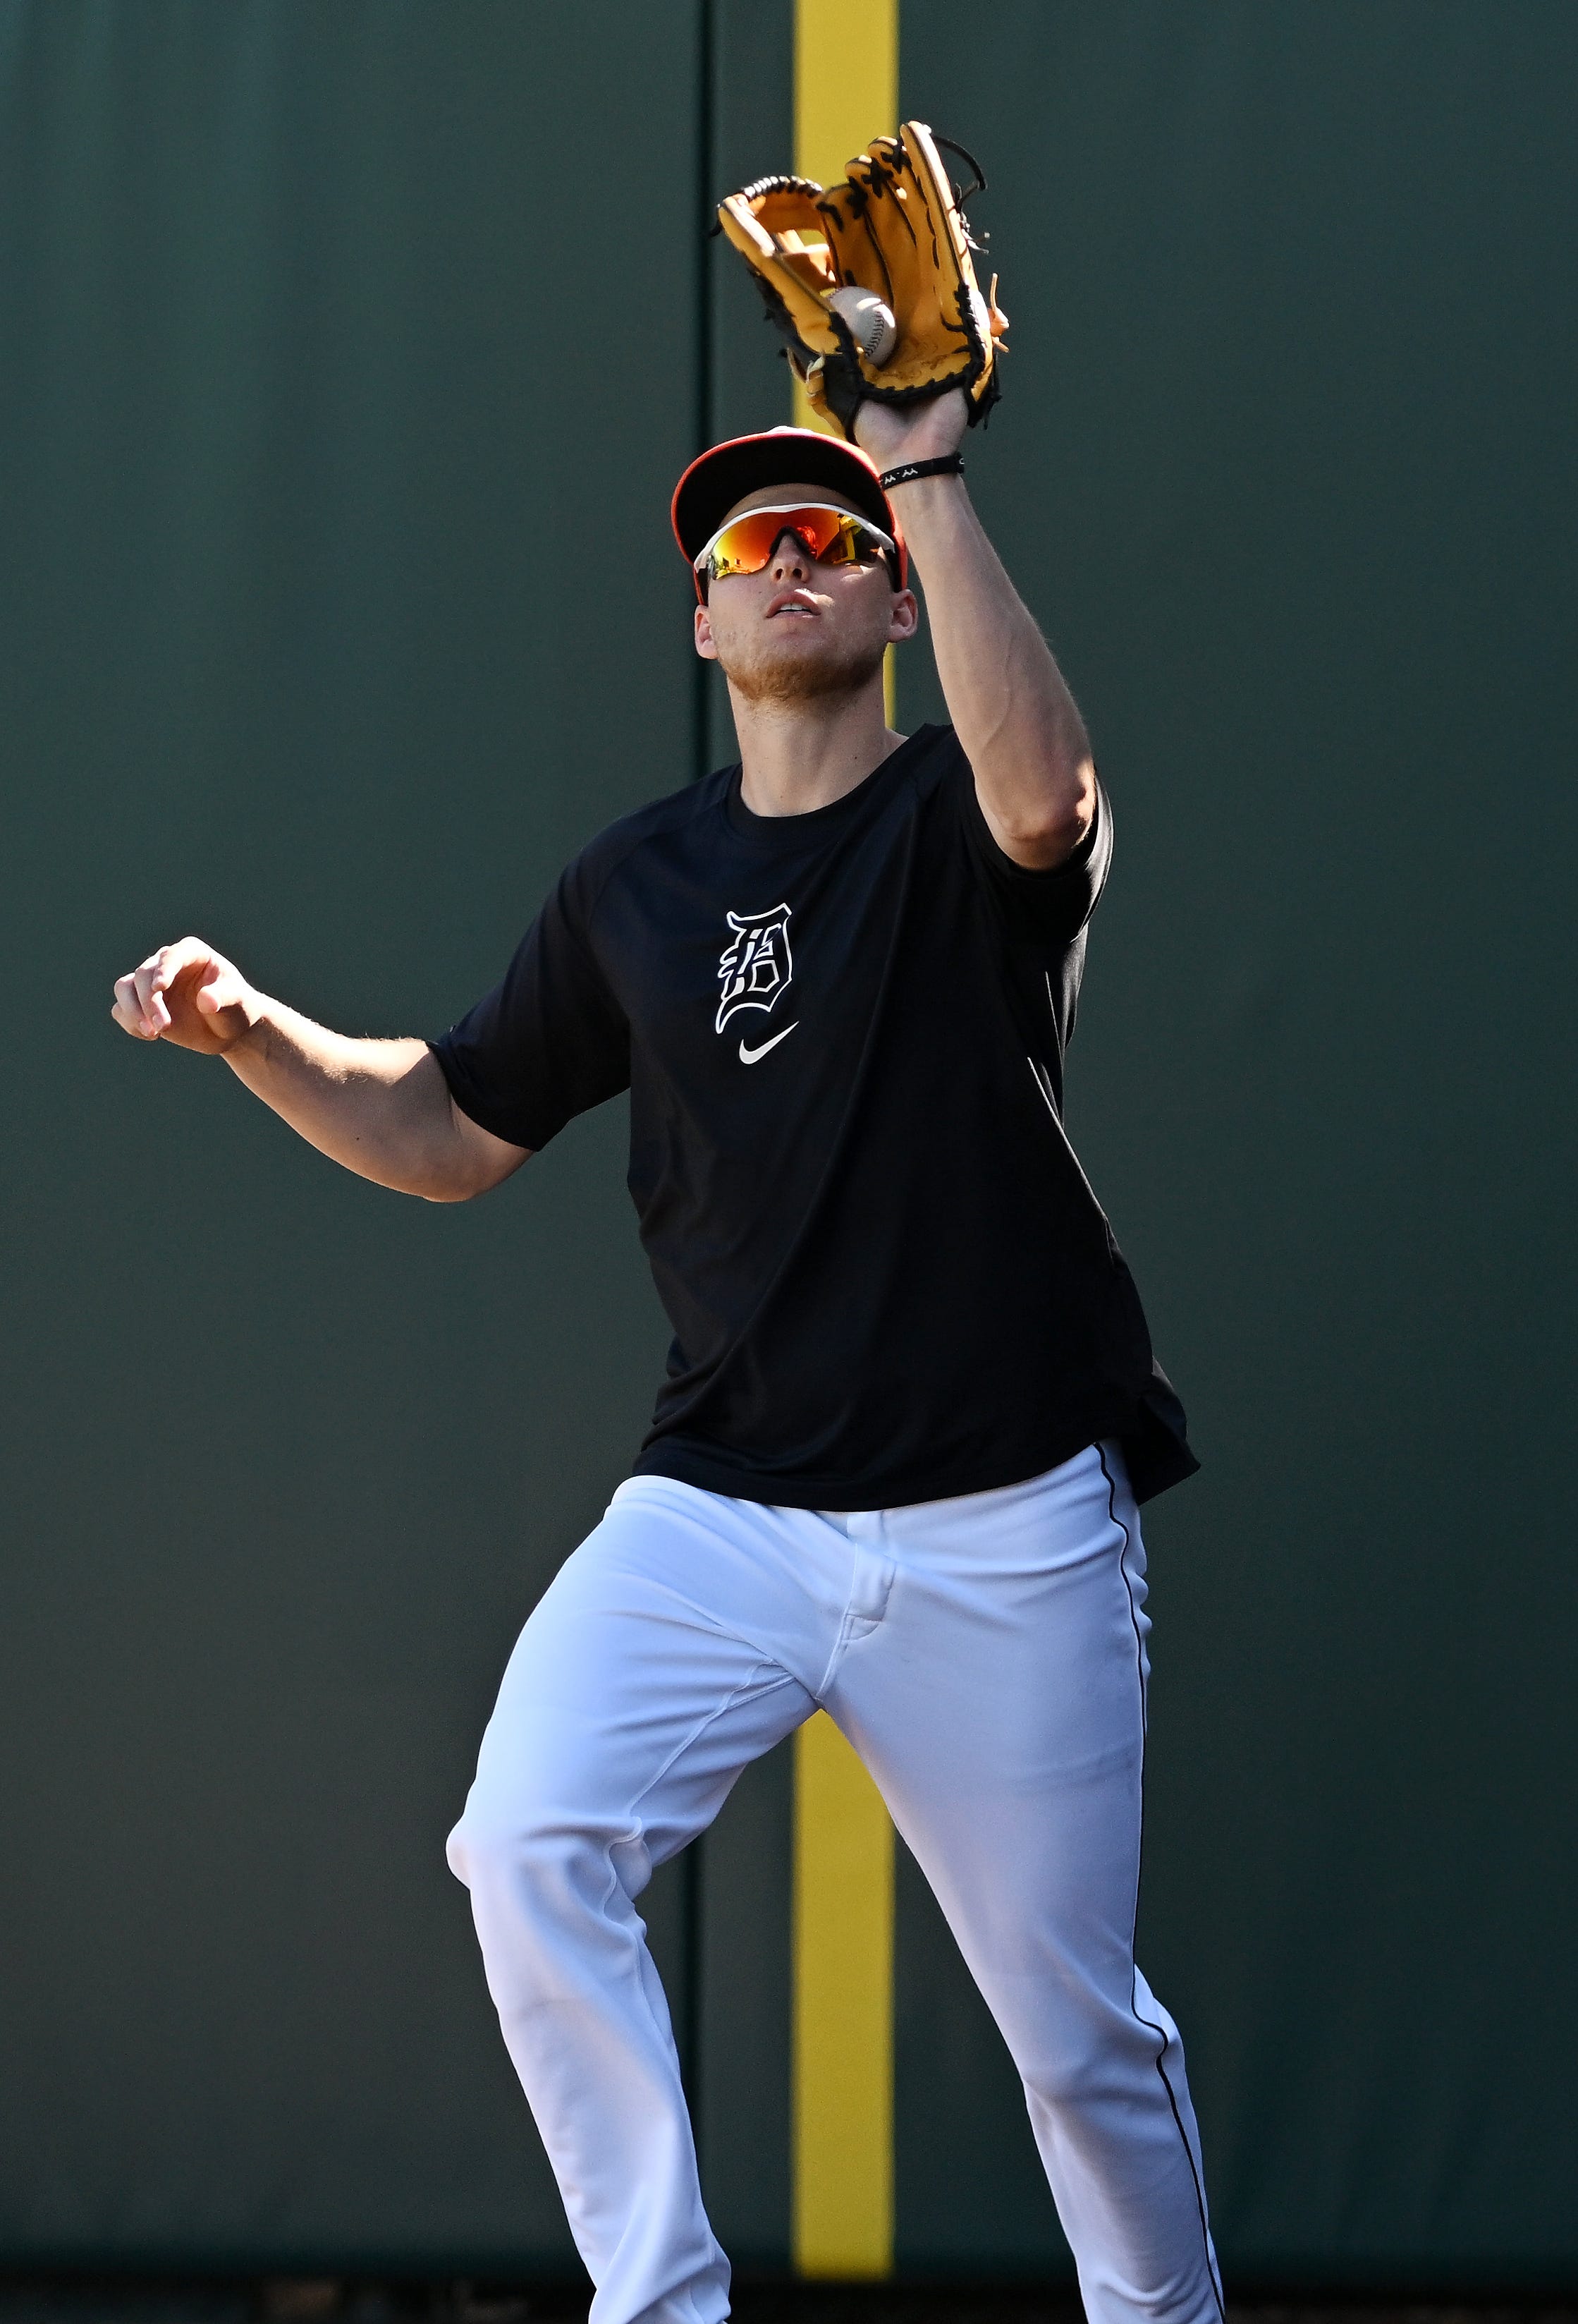 No. 22 – Parker Meadows, center field – L-L, 6-5, 210, Age in season: 24

There is an intriguing blend of speed and power here. He showed just a hint of it in his 37-game audition late last season. He has elite sub-30-feet-per-second sprint speed that he makes look effortless with his long, loping strides. He can cover gap to gap in center, even in spacious Comerica Park. The Tigers moved Riley Greene to a corner to make room for Meadows — that’s how well he plays center field. He also projects to hit, conservatively, 20-25 home runs and steal 20-30 bases. But he is also still developing, understanding how pitchers are setting him up and exploiting his high whiff rates on changeups (40.5%) and sliders (36.4%) and learning to defend himself against left-handed pitching. It’s why he’s worked on his bunt game. It’s still a work in progress, but it’s an exciting one.   

2024 salary: $770,000